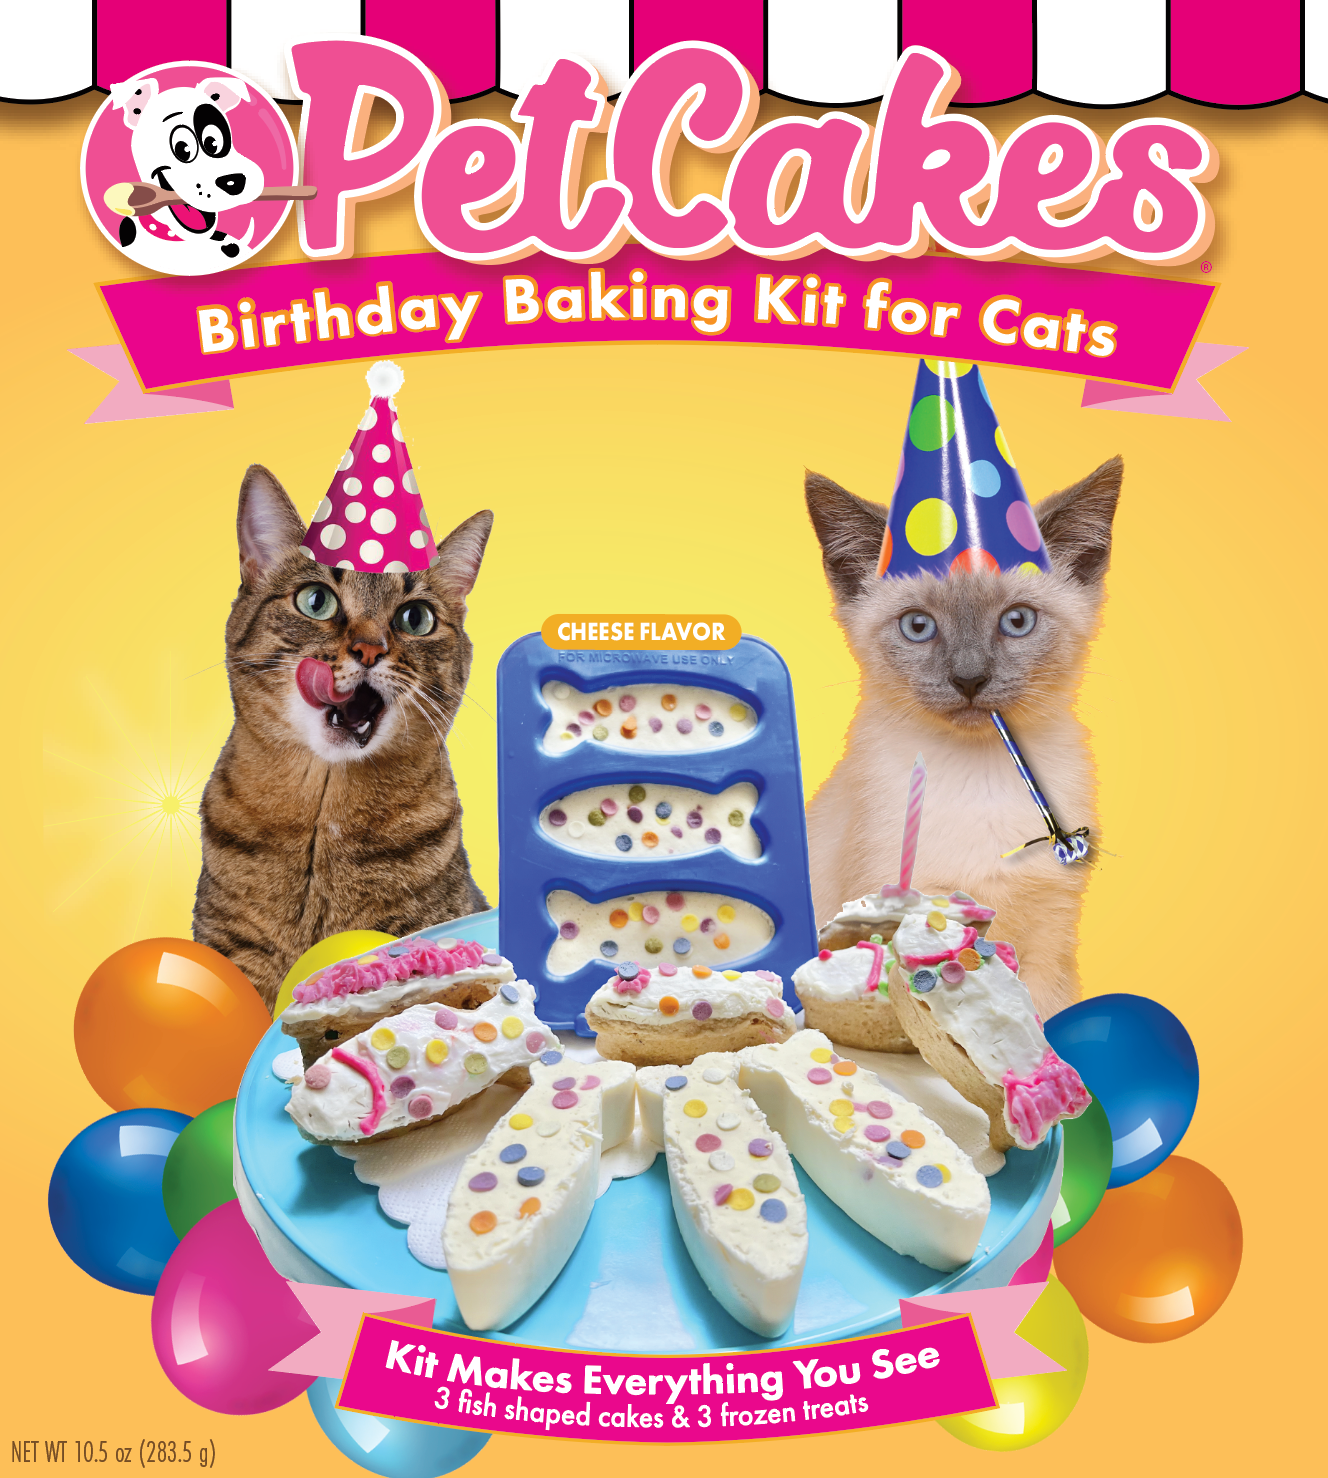 Birthday Baking Kit for Cats - 6 cakes + 6 ice cream + candle